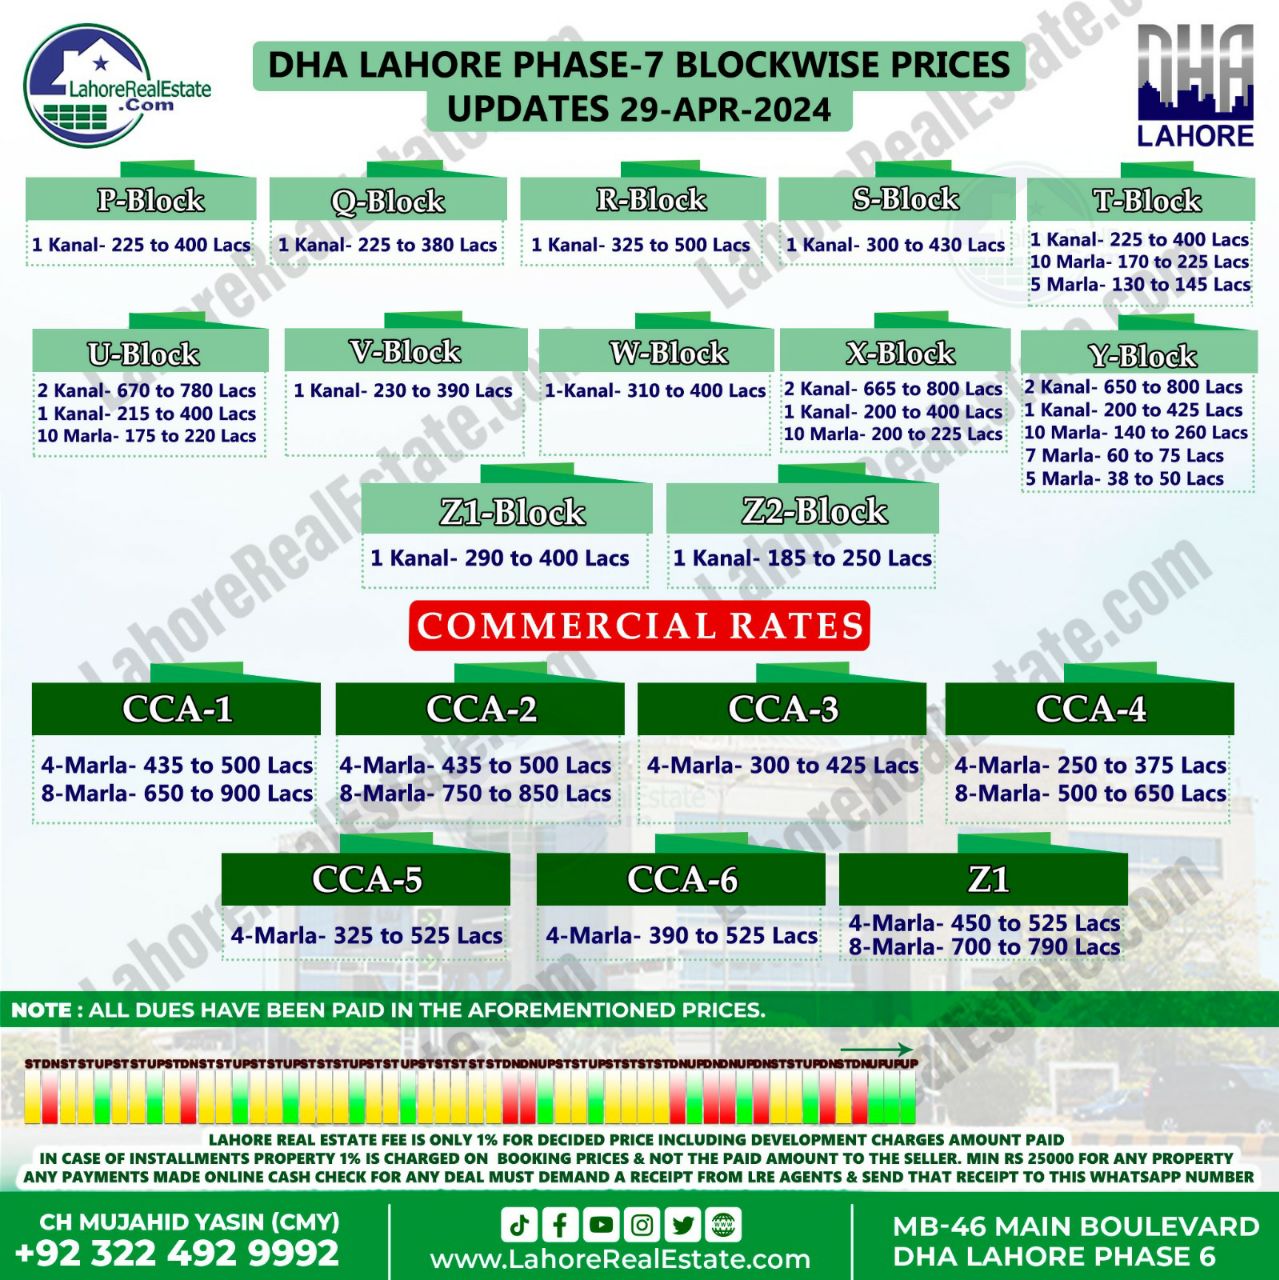 DHA Lahore Phase 7 Plot Prices Blockwise Rates 29th April 2024